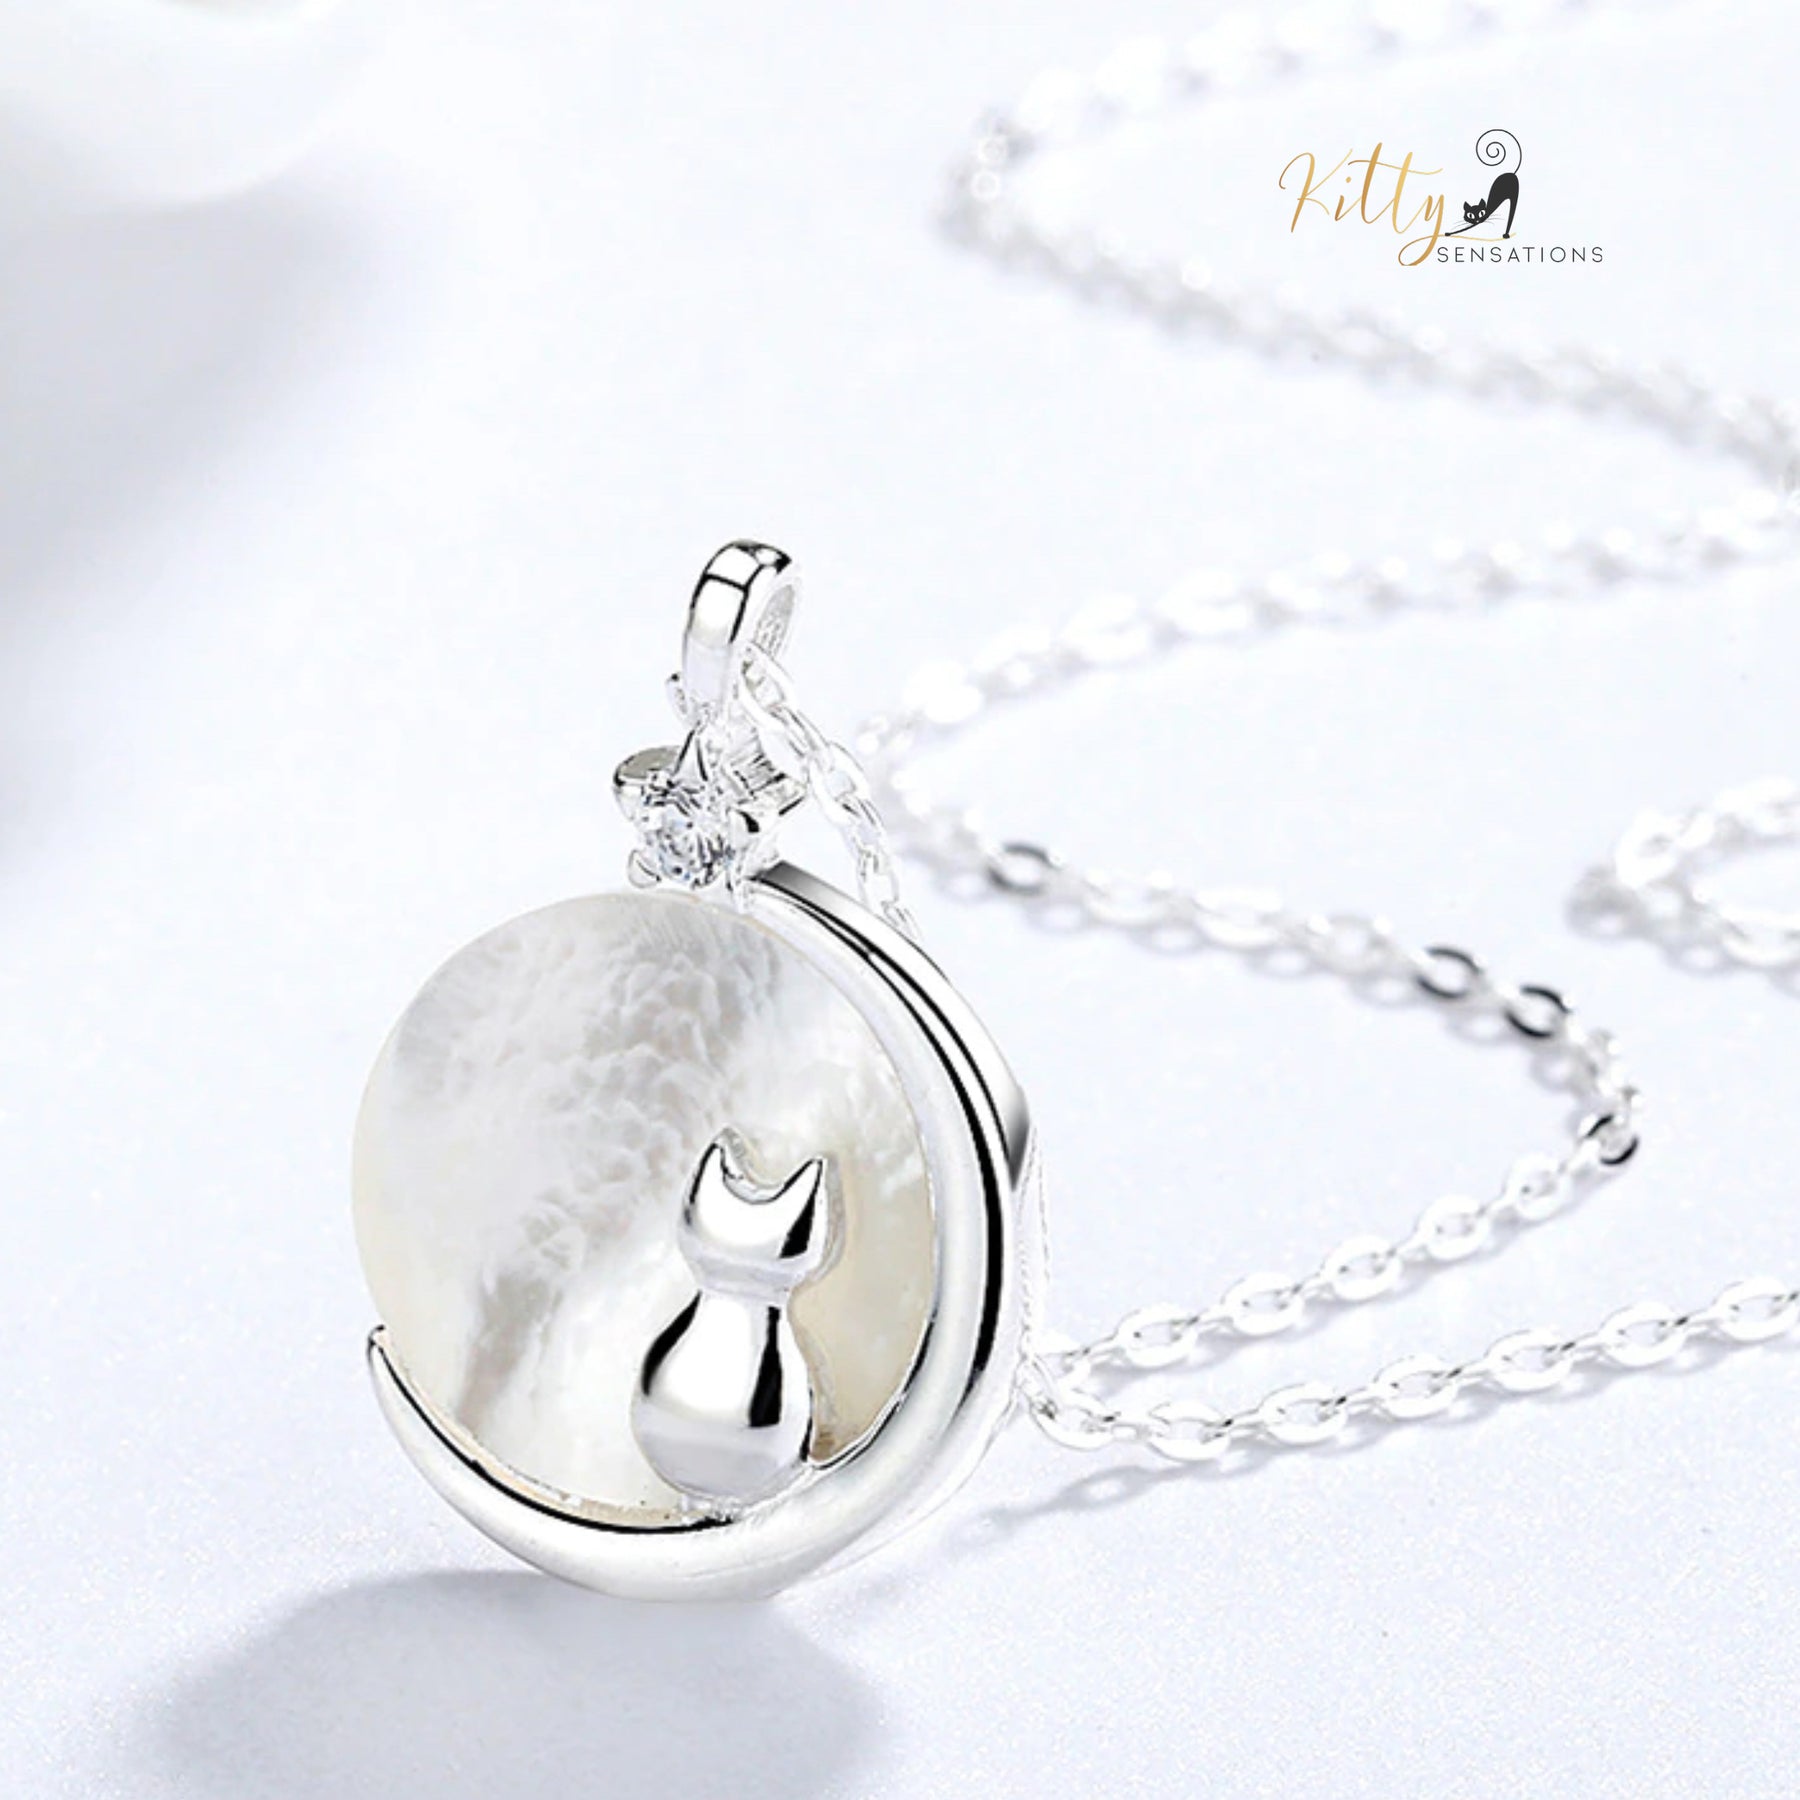 www.KittySensations.com Mother-of-Pearl Moon Kitty Necklace in Solid 925 Sterling Silver (Platinum or Gold Plated) ($35.85): https://www.kittysensations.com/products/mother-of-pearl-moon-kitty-necklace-in-solid-925-sterling-silver-platinum-or-gold-plated?variant=40121008848962